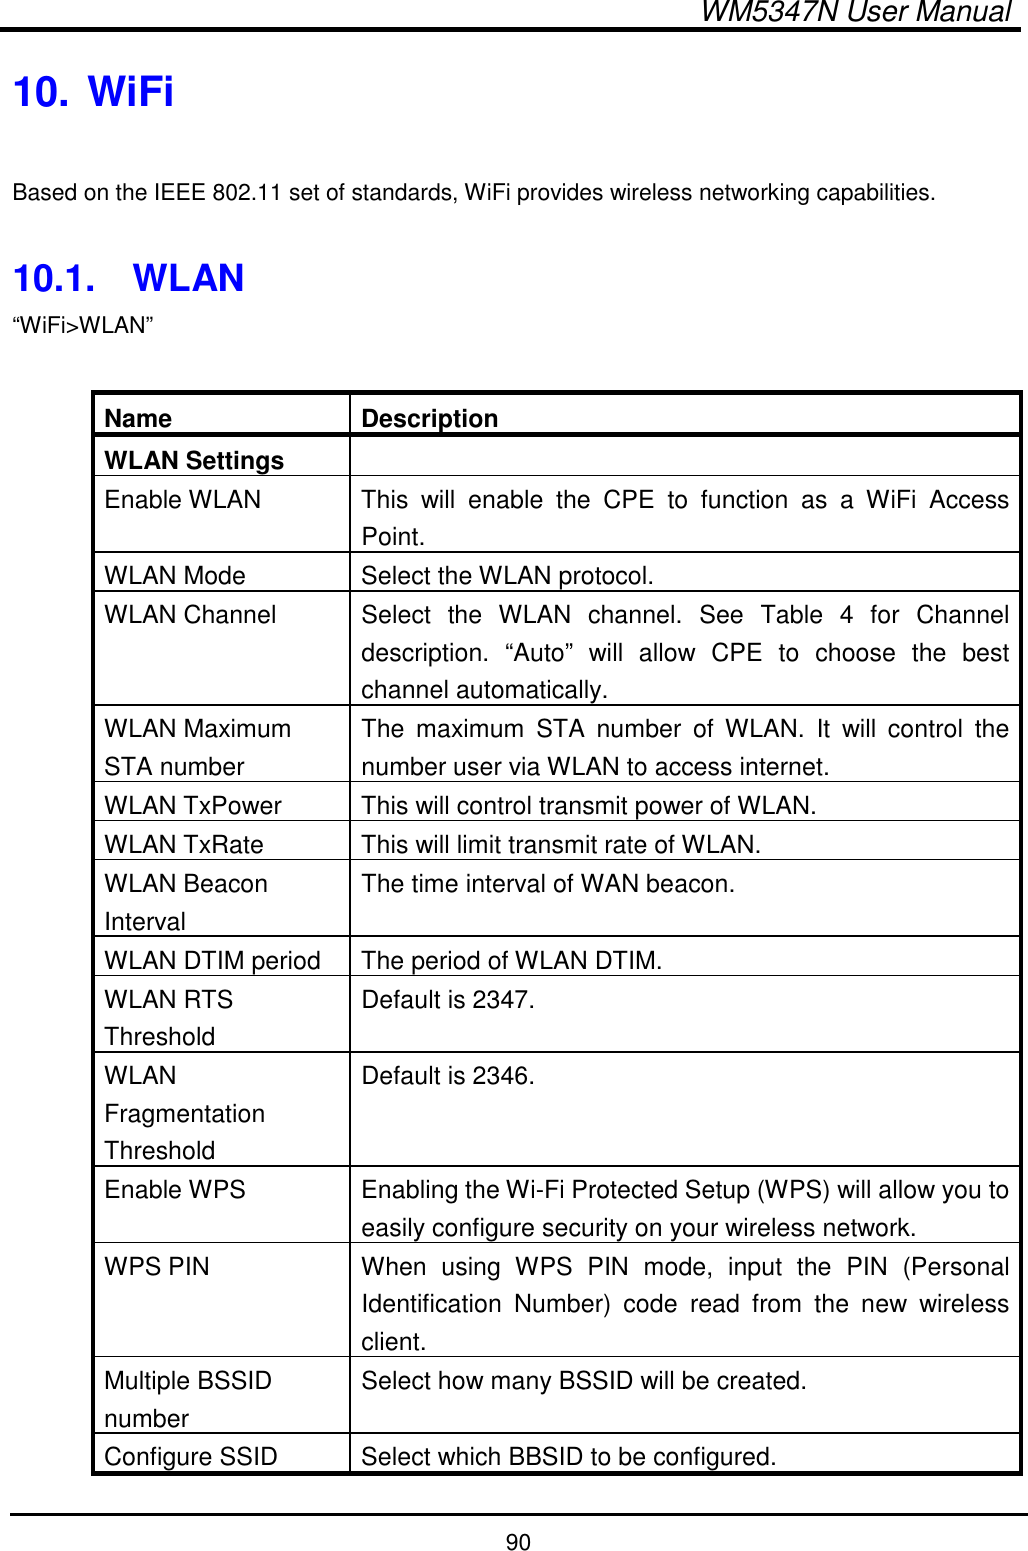  WM5347N User Manual  90 10. WiFi  Based on the IEEE 802.11 set of standards, WiFi provides wireless networking capabilities.  10.1.  WLAN “WiFi&gt;WLAN”  Name  Description WLAN Settings   Enable WLAN  This  will  enable  the  CPE  to  function  as  a  WiFi  Access Point. WLAN Mode  Select the WLAN protocol. WLAN Channel  Select  the  WLAN  channel.  See  Table  4  for  Channel description.  “Auto”  will  allow  CPE  to  choose  the  best channel automatically. WLAN Maximum STA number The  maximum  STA  number  of  WLAN.  It  will  control  the number user via WLAN to access internet. WLAN TxPower  This will control transmit power of WLAN. WLAN TxRate  This will limit transmit rate of WLAN. WLAN Beacon Interval The time interval of WAN beacon. WLAN DTIM period  The period of WLAN DTIM. WLAN RTS Threshold Default is 2347. WLAN Fragmentation Threshold Default is 2346. Enable WPS  Enabling the Wi-Fi Protected Setup (WPS) will allow you to easily configure security on your wireless network. WPS PIN  When  using  WPS  PIN  mode,  input  the  PIN  (Personal Identification  Number)  code  read  from  the  new  wireless client. Multiple BSSID number Select how many BSSID will be created. Configure SSID  Select which BBSID to be configured. 